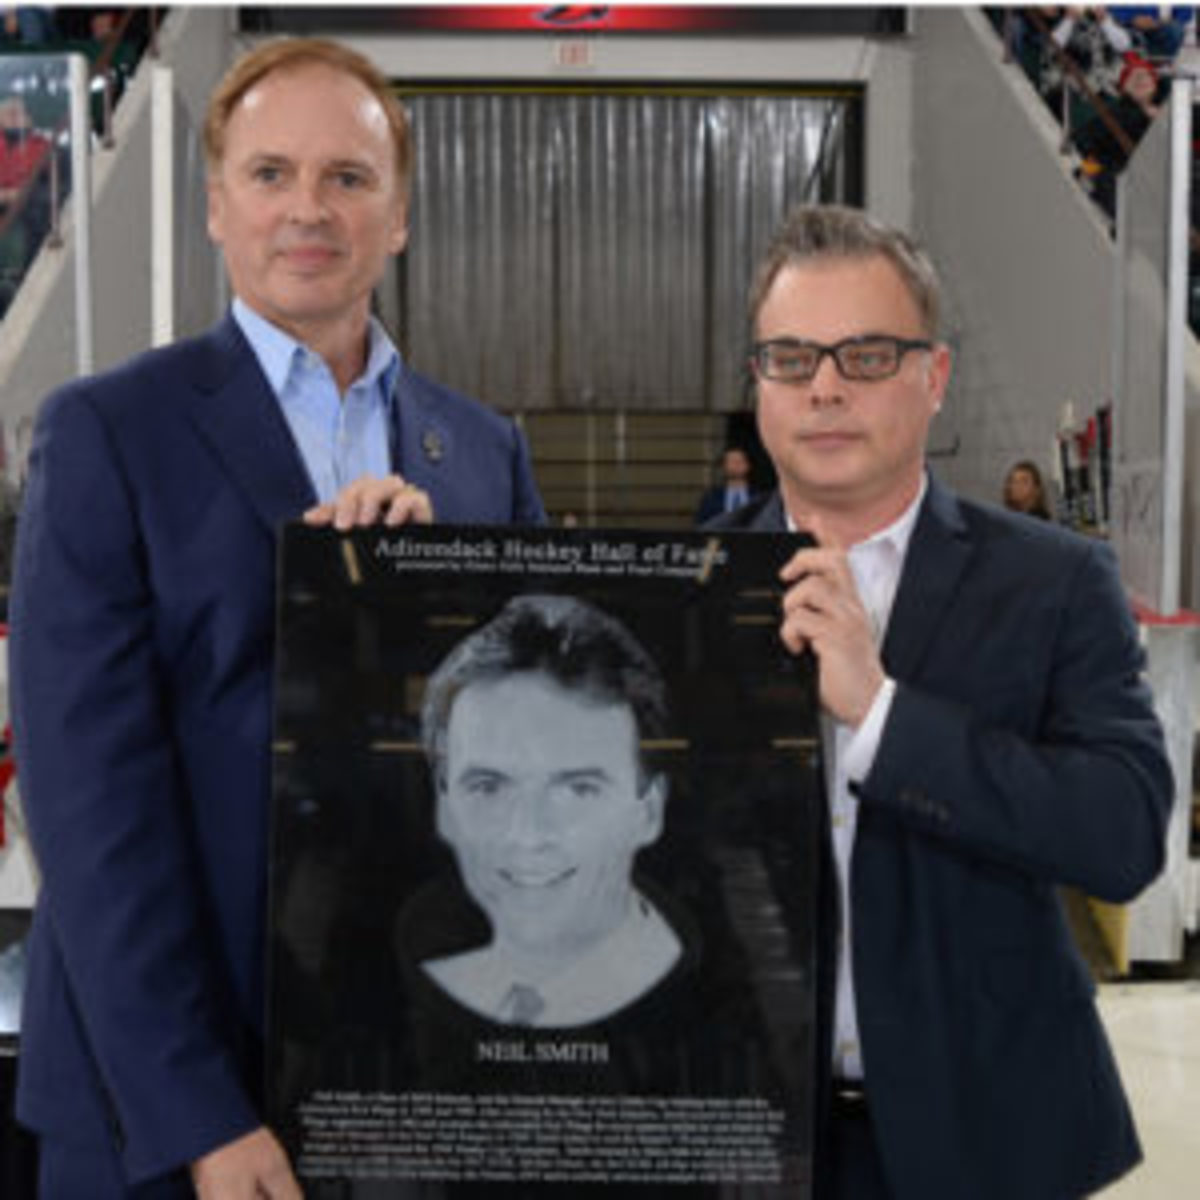  Neil Smith (left) with his Hall of Fame plaque with Adirondack Thunder General Manager Jeff Meade (right) at the induction ceremony when Smith was inducted into the Adirondack Hockey Hall of Fame. (Photos courtesy Adirondack Thunder organization)